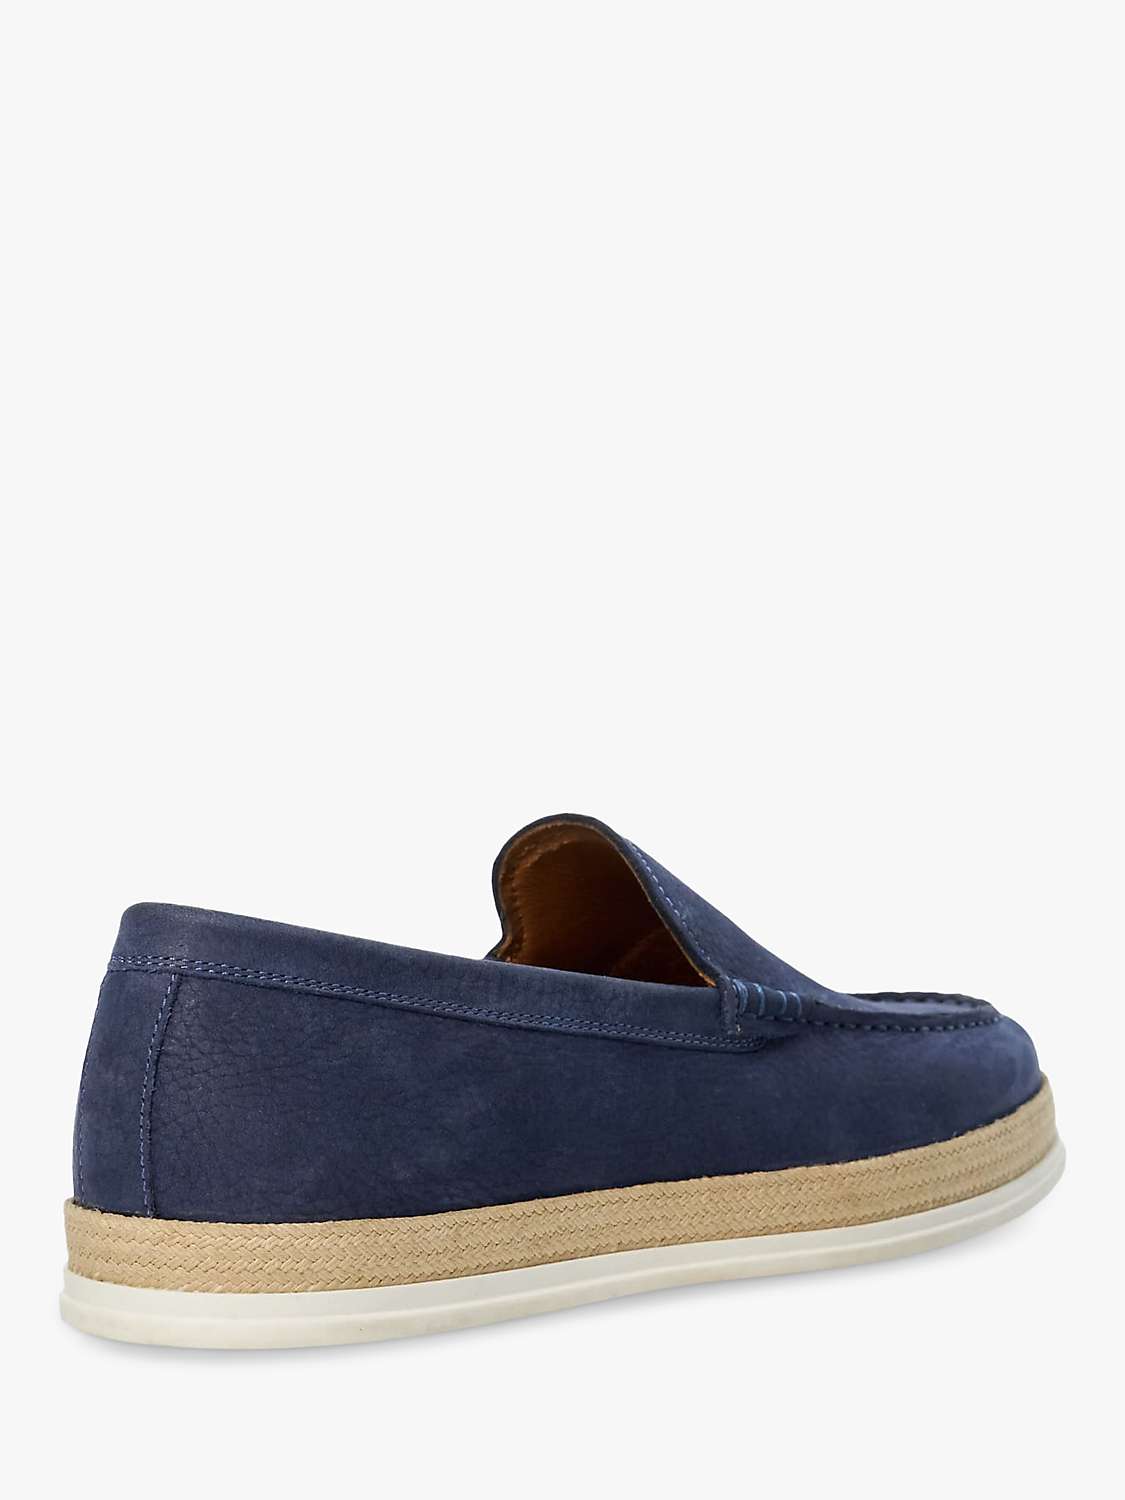 Buy Dune Bountii Leather Espadrille Detail Shoes, Navy Online at johnlewis.com